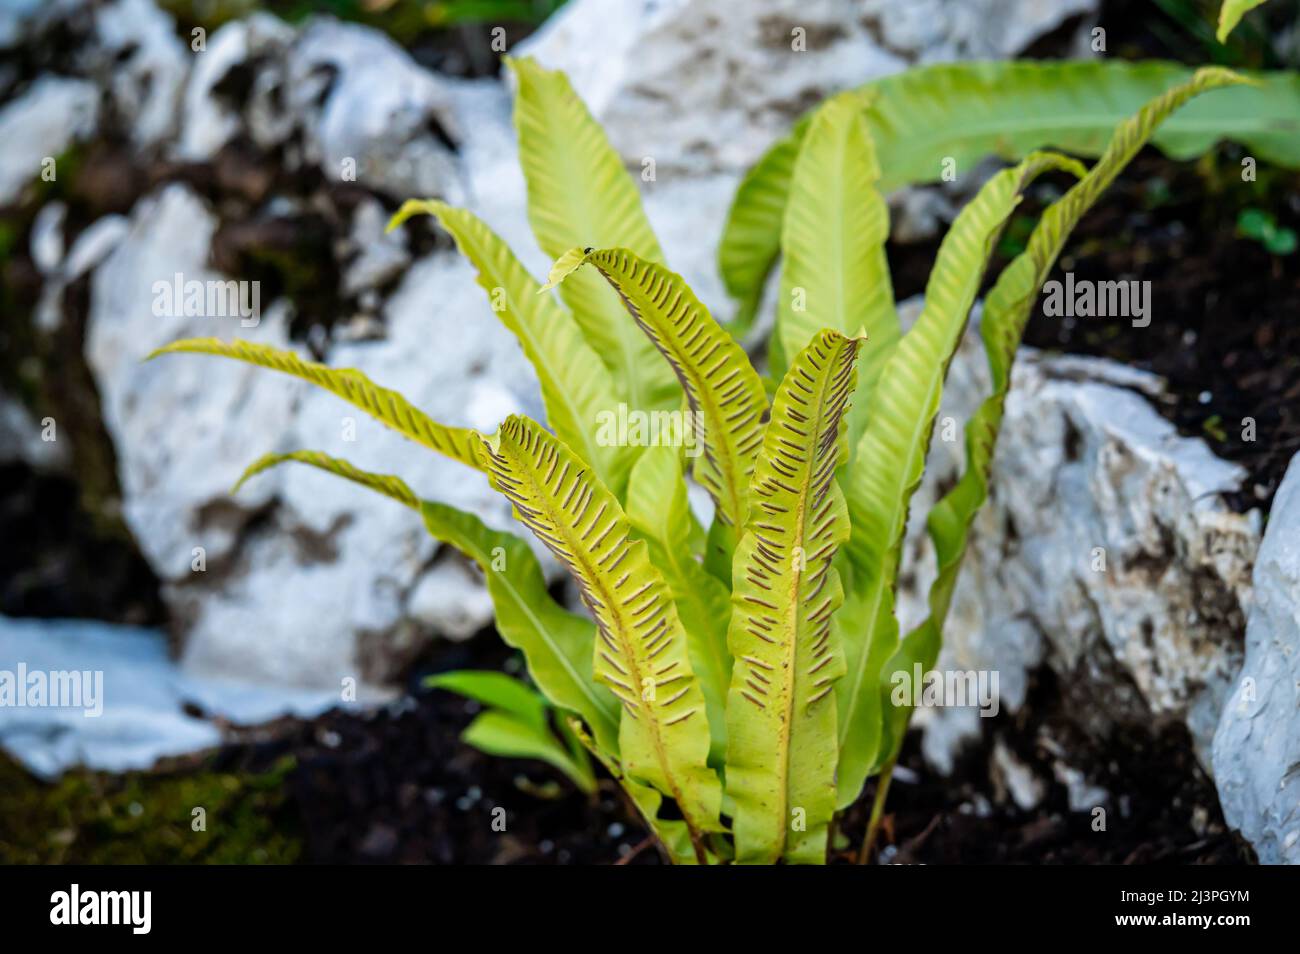 Sporangia on fern. Groupes de sporanges on fern leaves. Reproduction of olypodiopsida or Polypodiophyta. Beauty in nature. Stock Photo